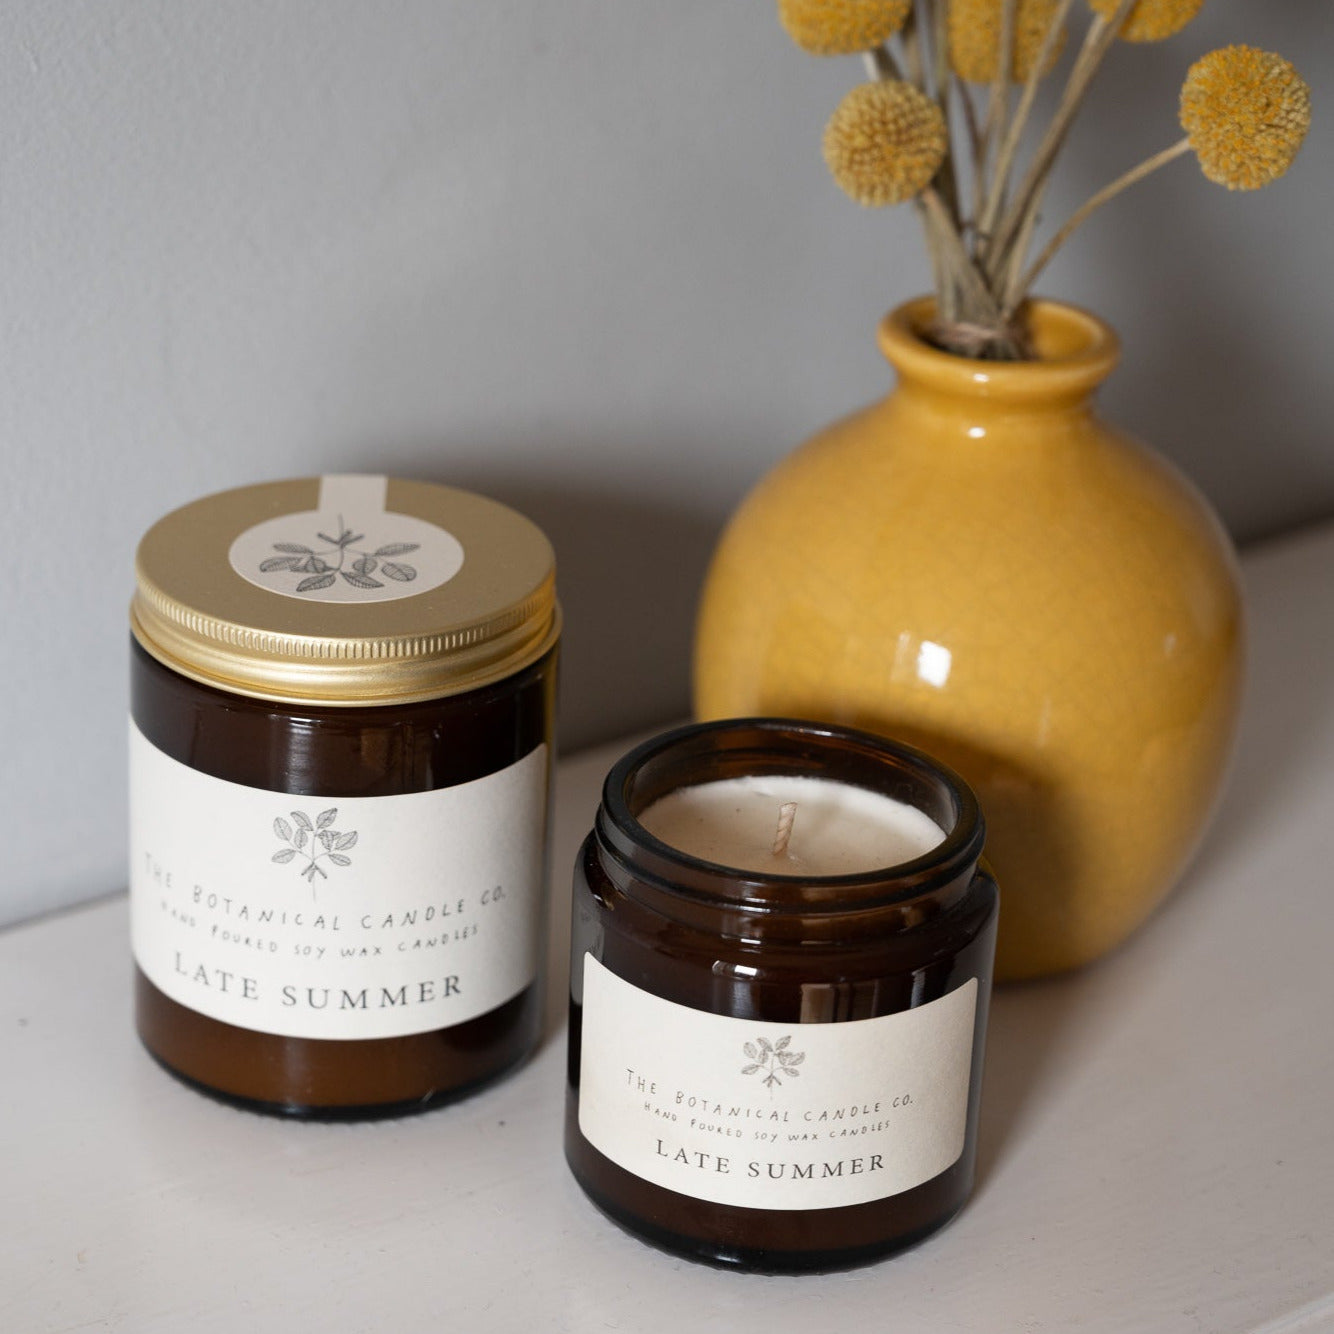 Late Summer Candle by Botanical Candle Co.